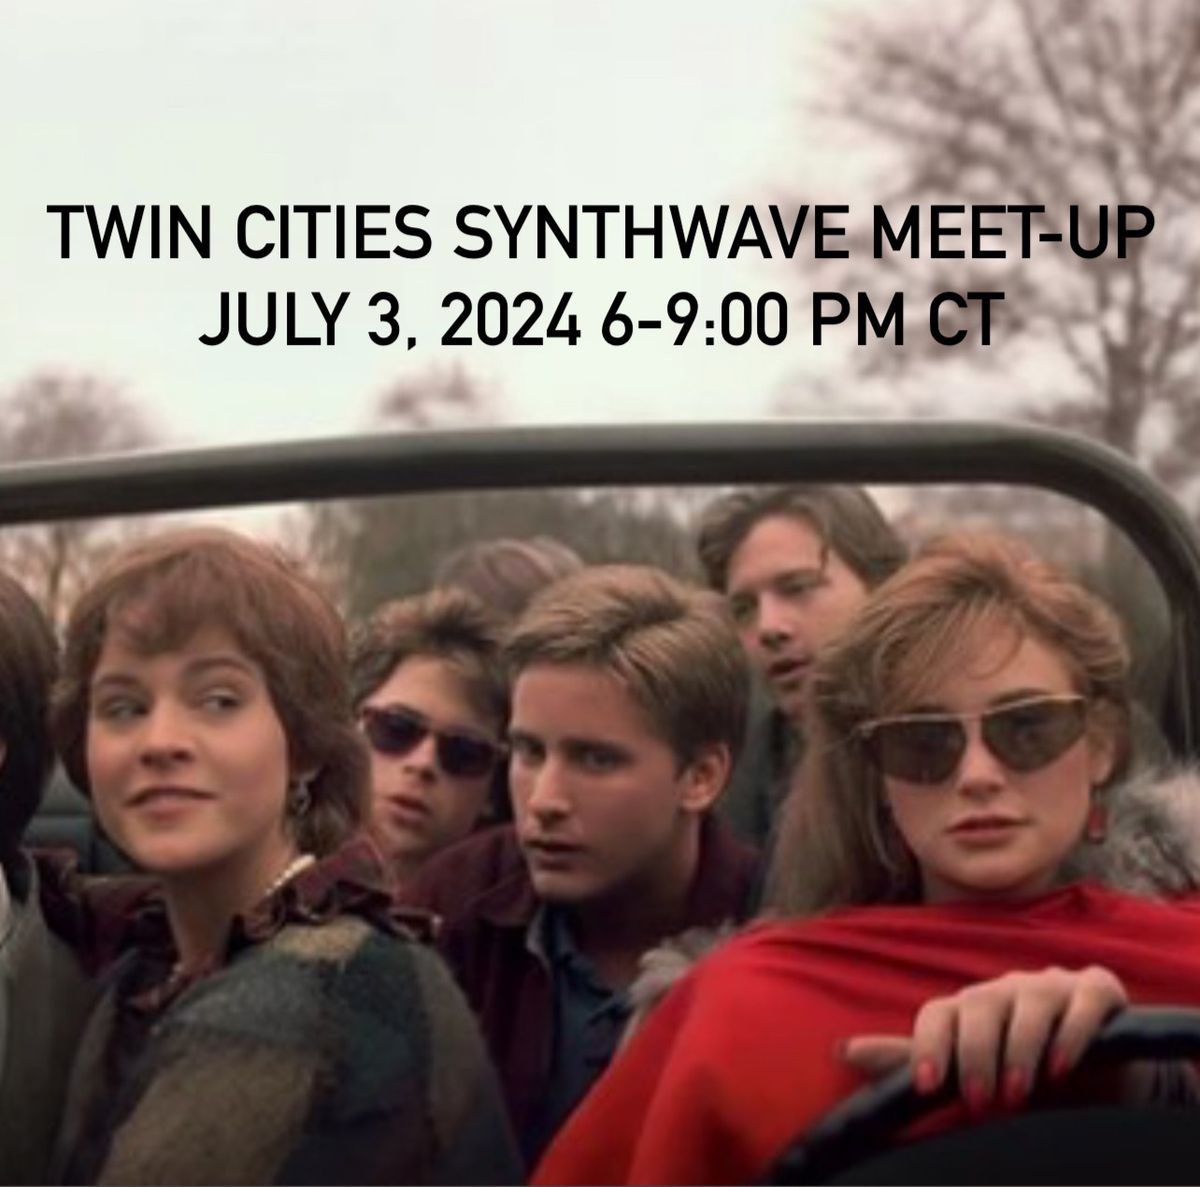 Twin Cities Synthwave Meet-up